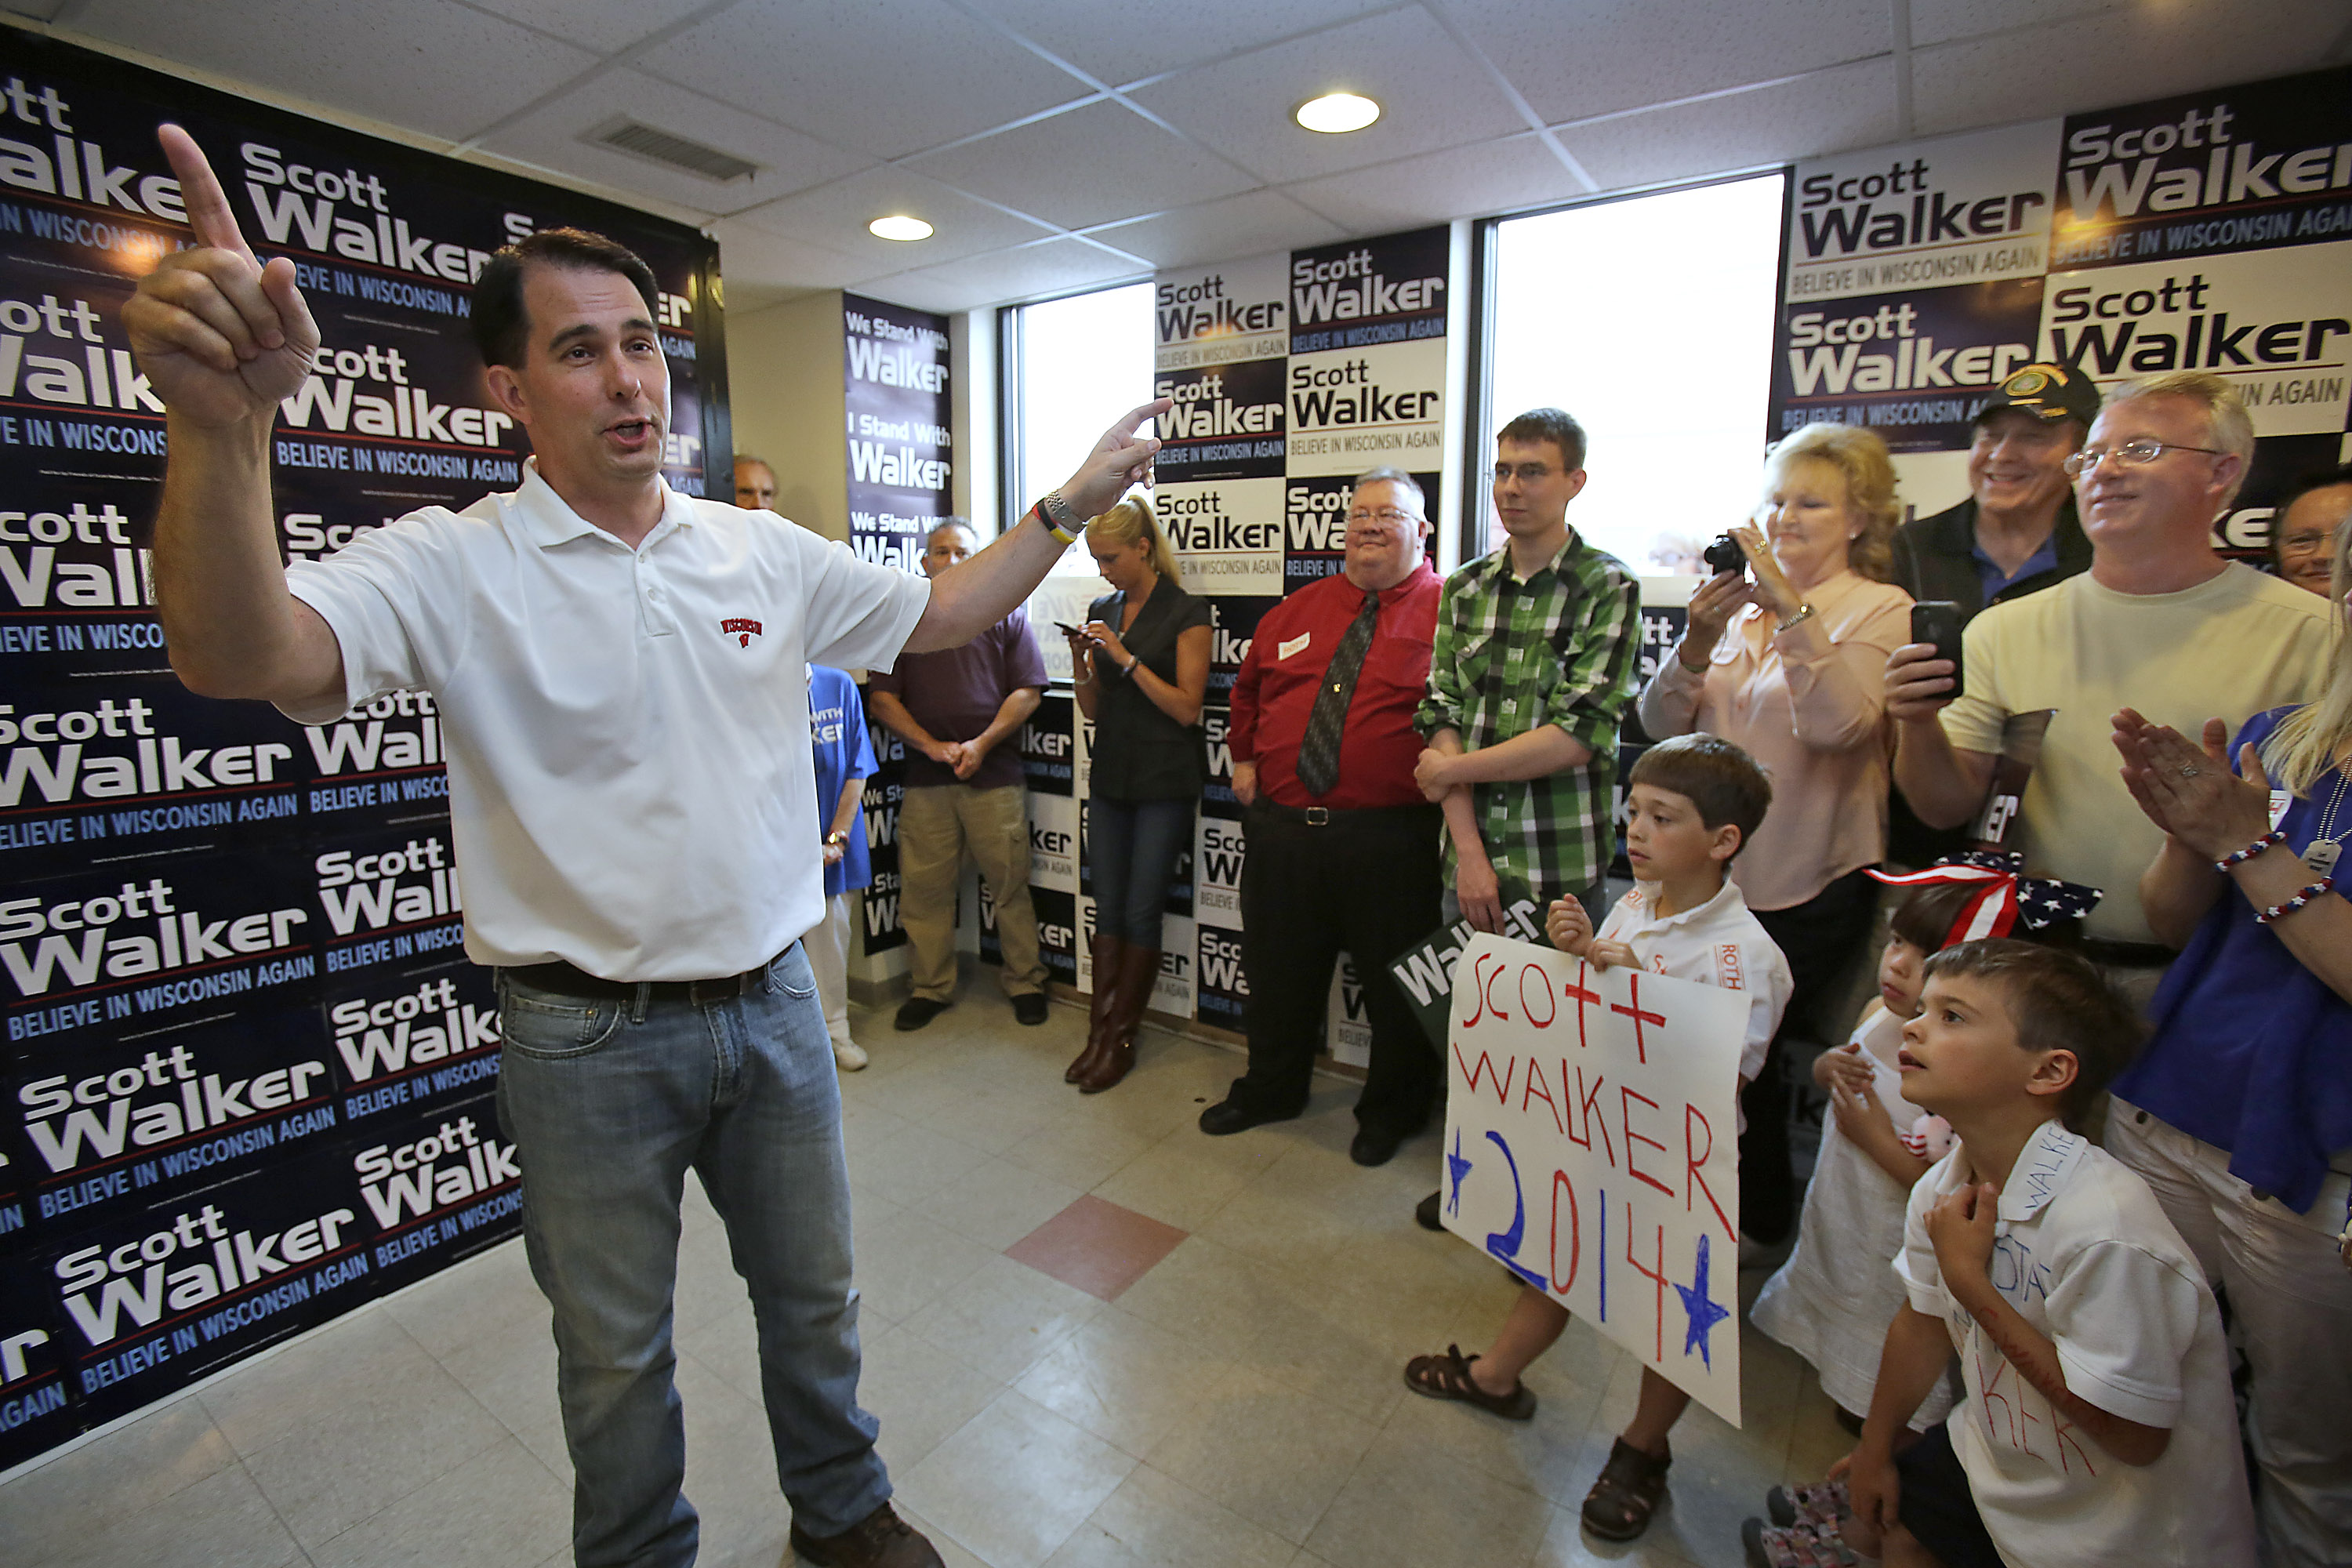 Wisconsin Governor Scott Walker makes a stop at the Republican Party of Wisconsin Appleton Headquarters Saturday, June 21, 2014 in Appleton, Wis. (Sharon Cekada—AP)